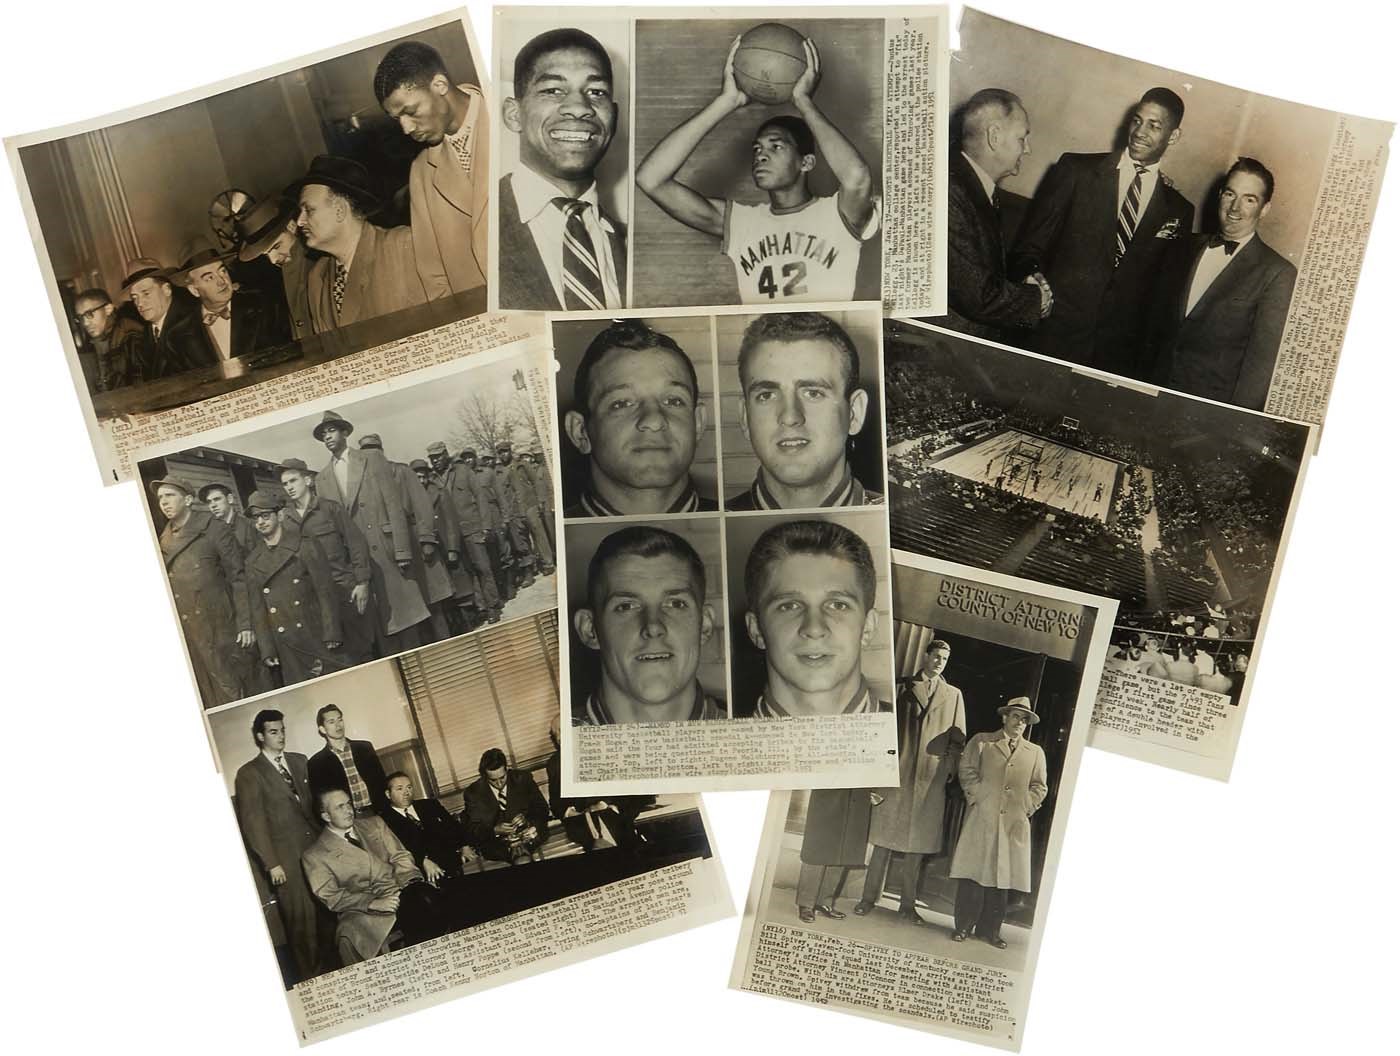 1950-51 CCNY Basketball Point Shaving Scandal Wire Photos (7)